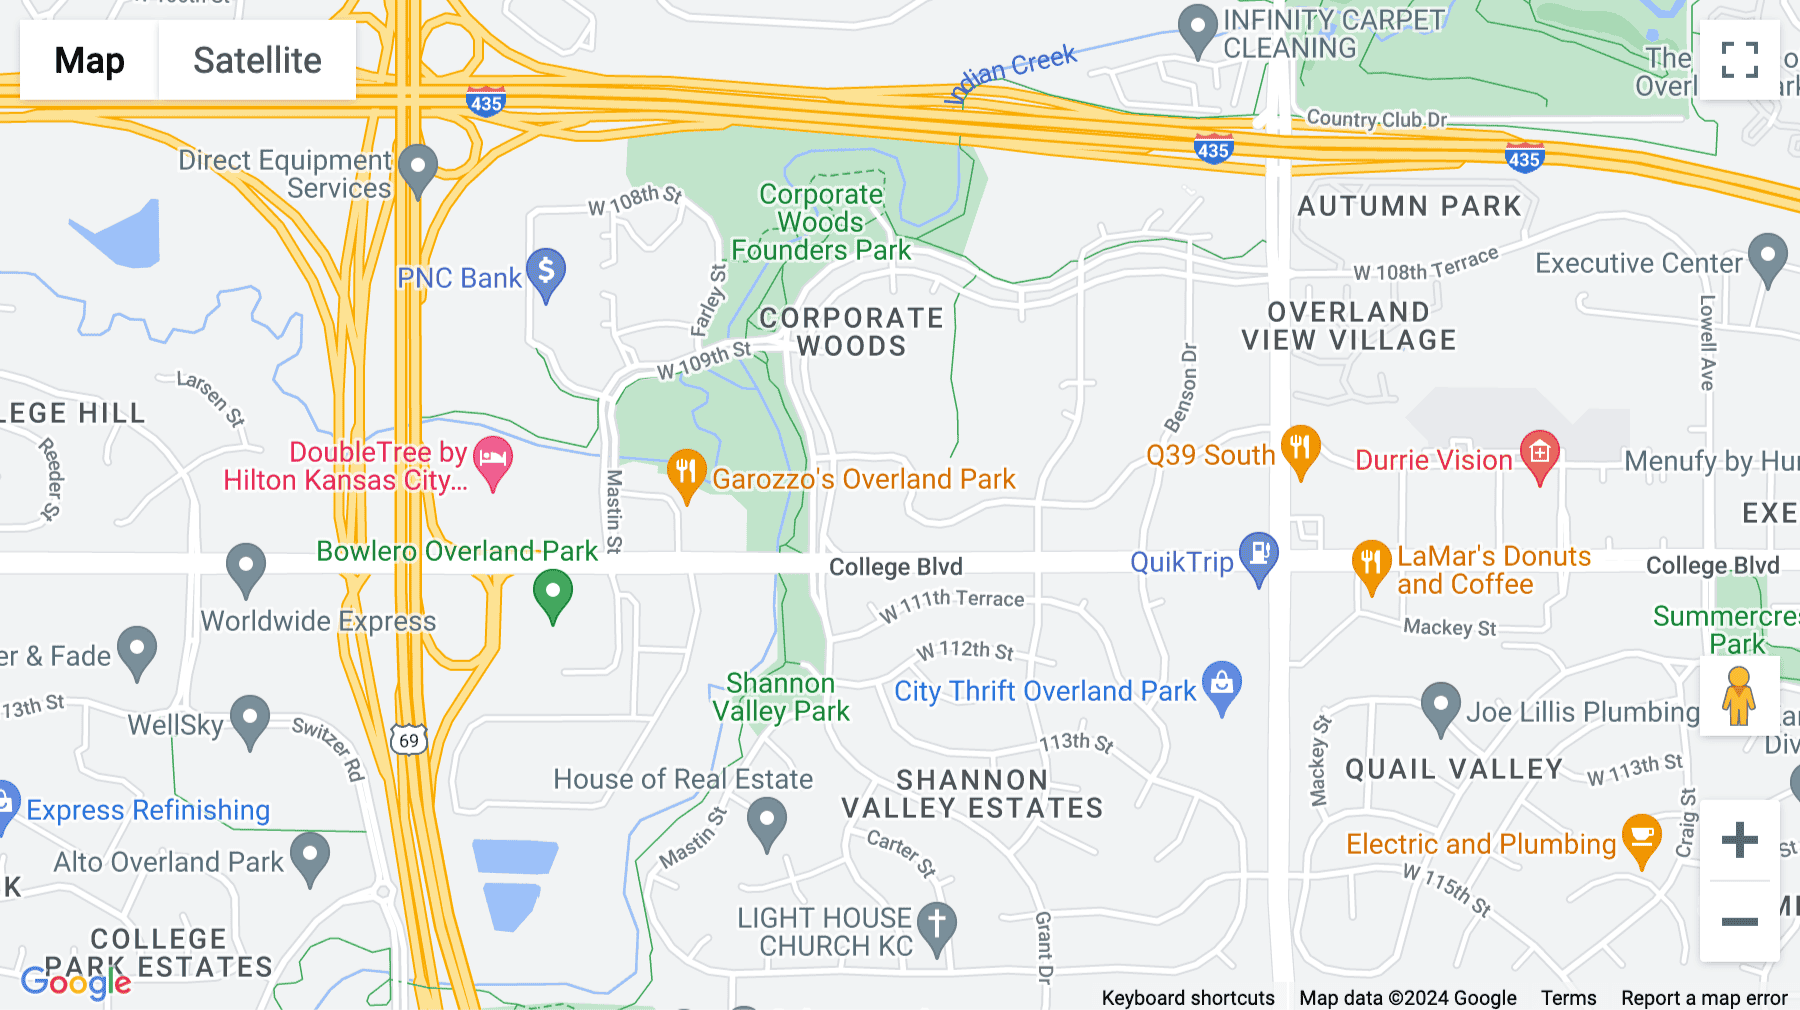 Click for interative map of 9393 West 110th St., 51 Corporate Woods, Suite 500, Corporate Woods Center, Overland Park